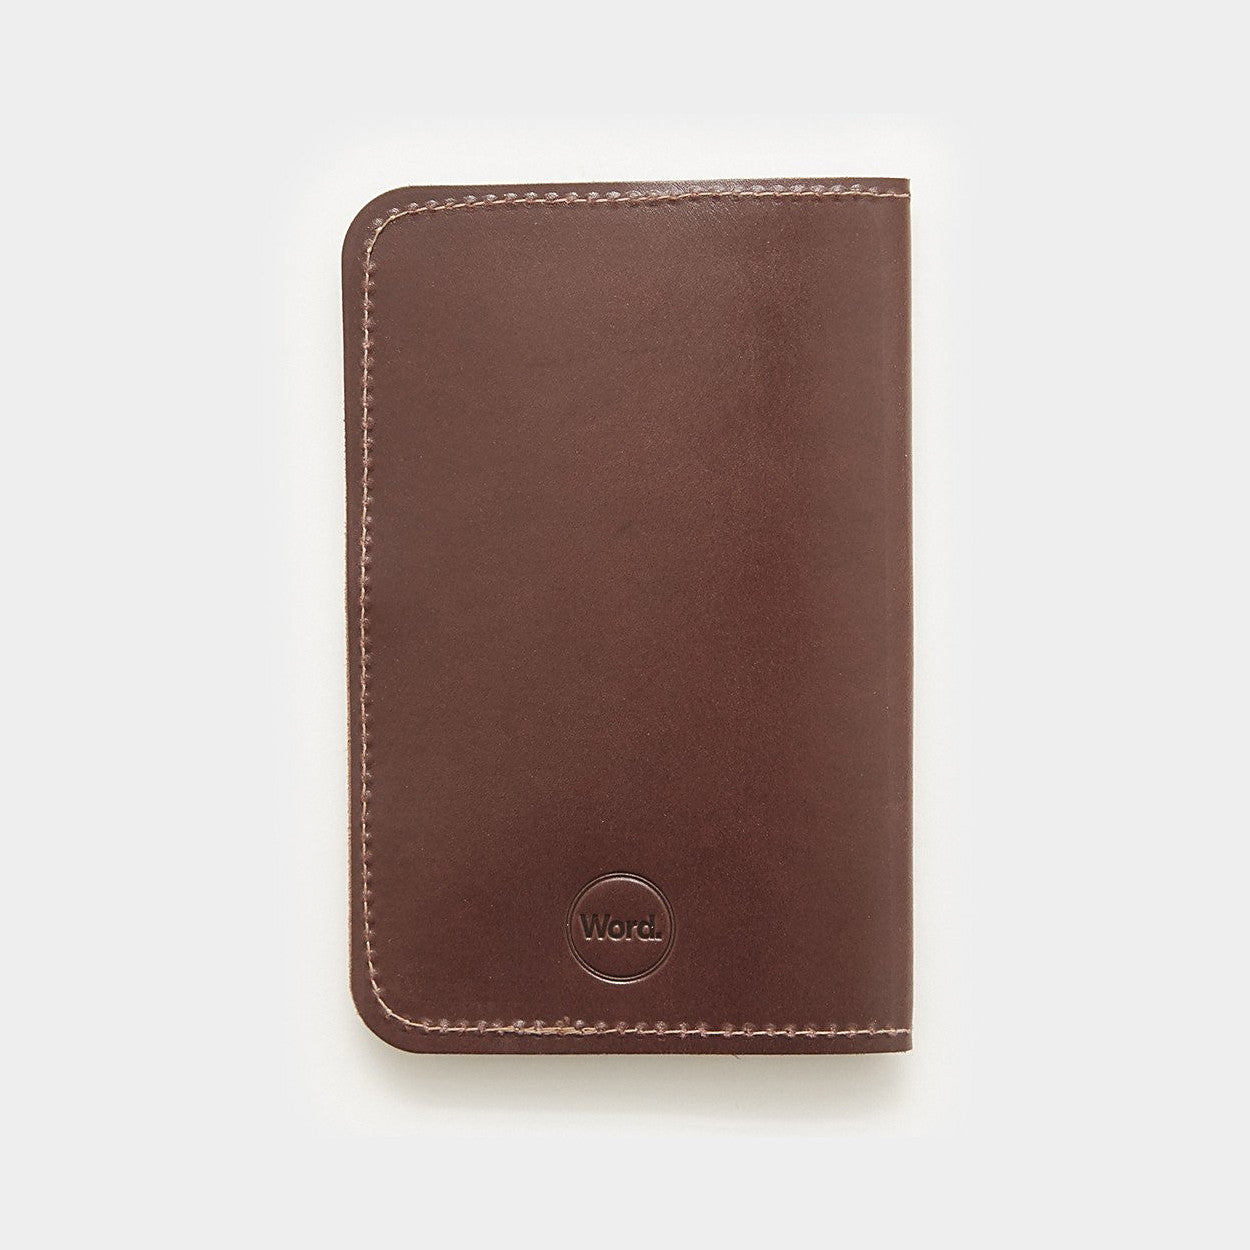 Leather Sleeve - Brown